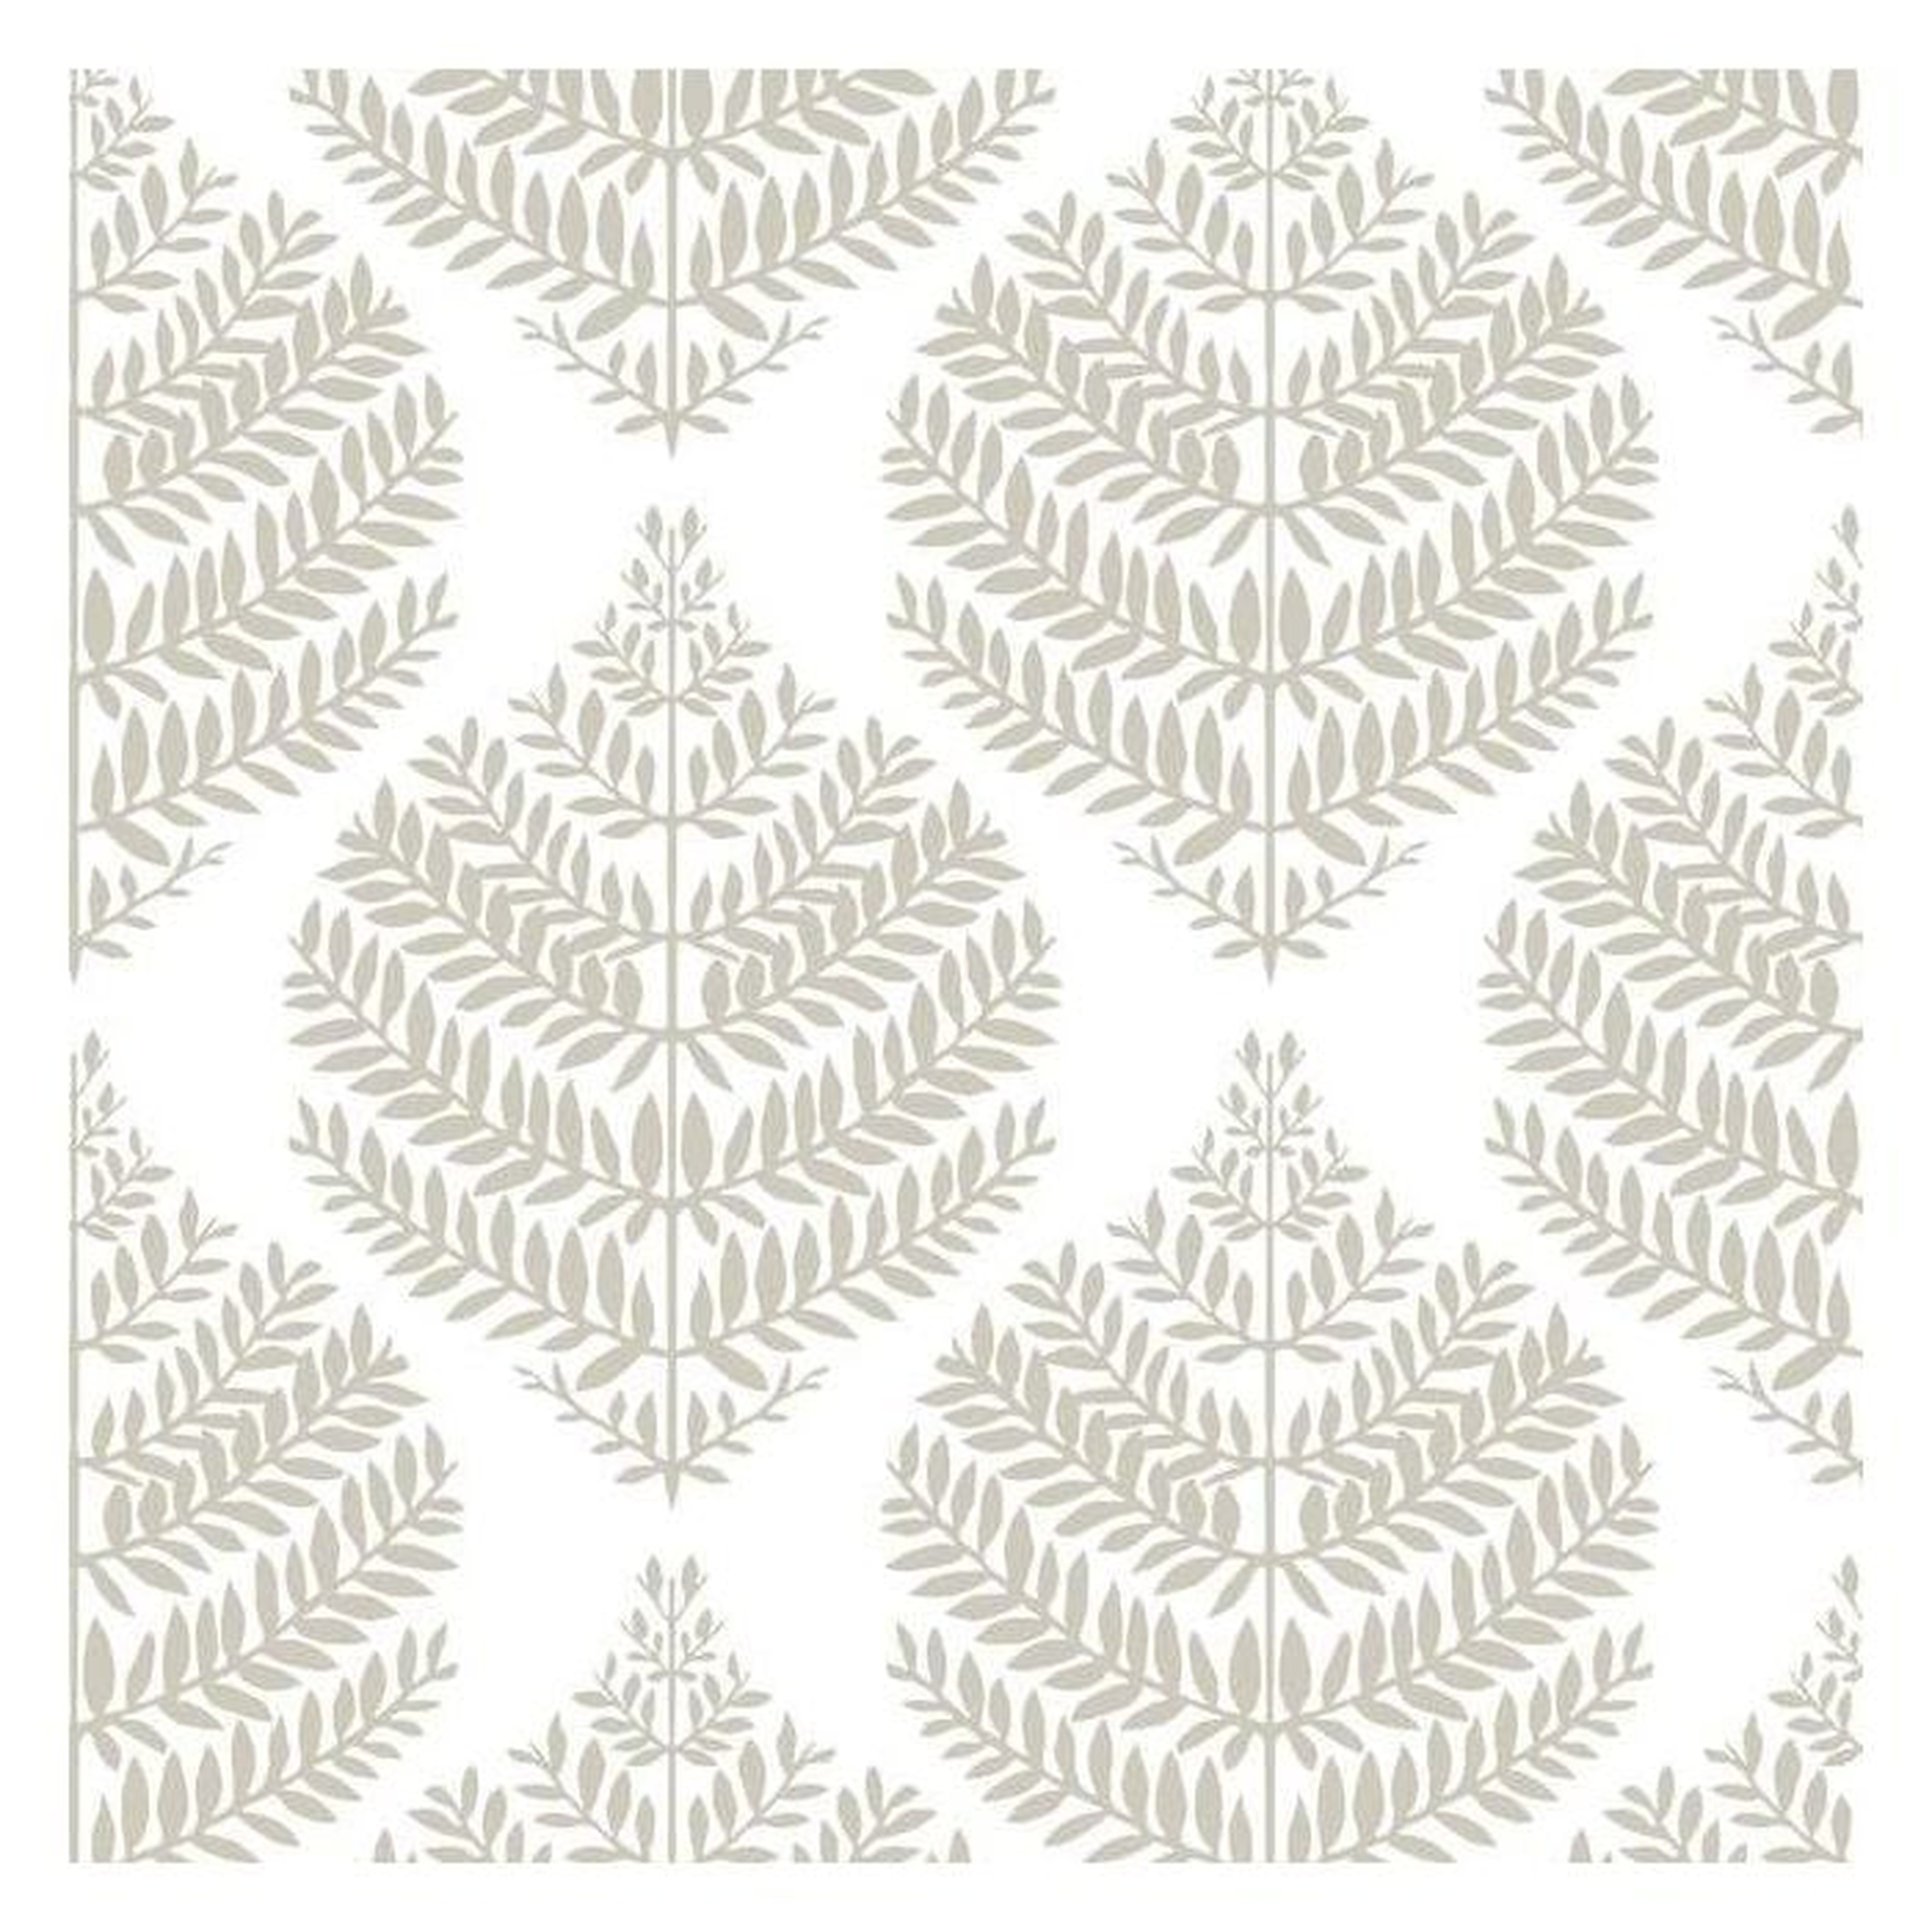 Hygge Fern Damask Peel and Stick Wallpaper, Taupe - York Wallcoverings